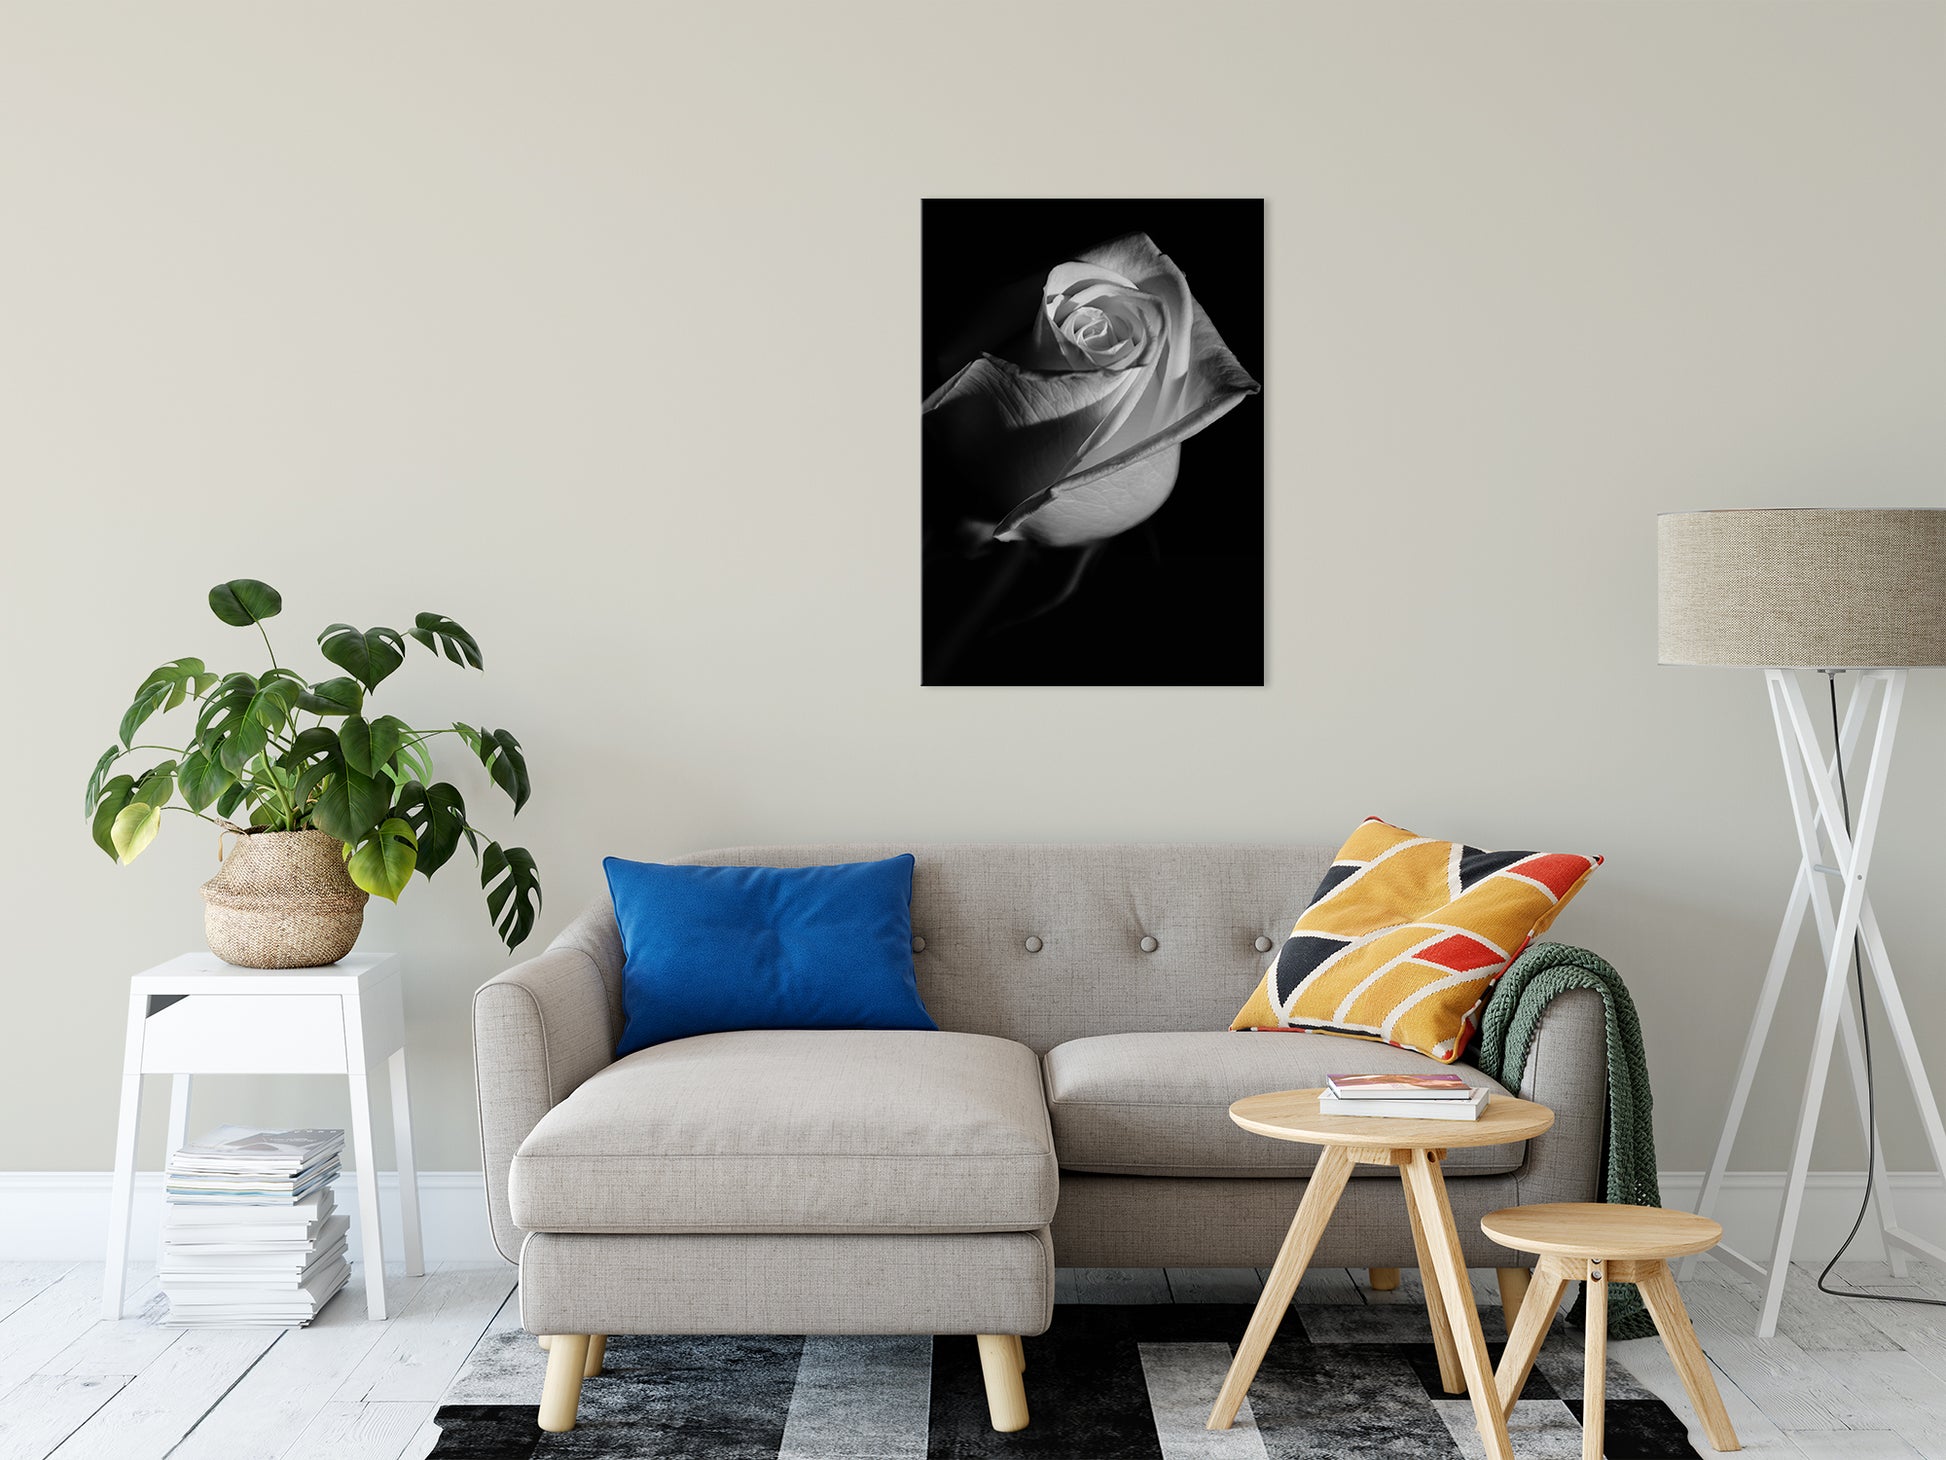 Rose on Black Black & White Nature / Floral Photo Fine Art Canvas Wall Art Prints 24" x 36" - PIPAFINEART